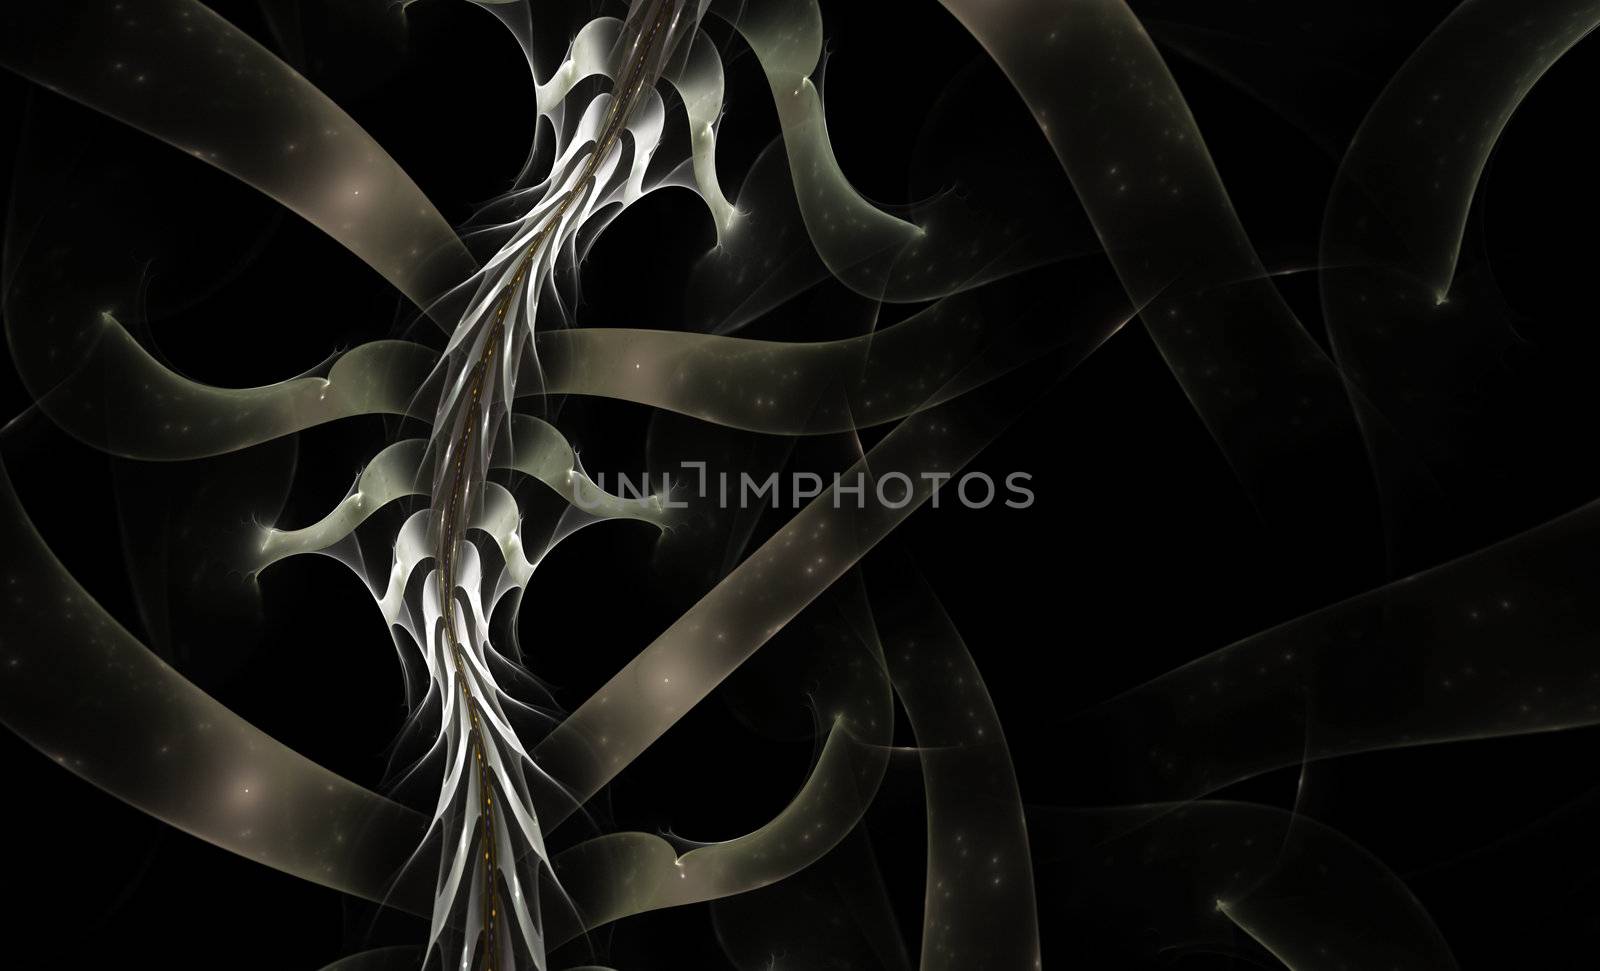 Braided thorns and ribbons rendered in Apophysis on a black background with copy space.